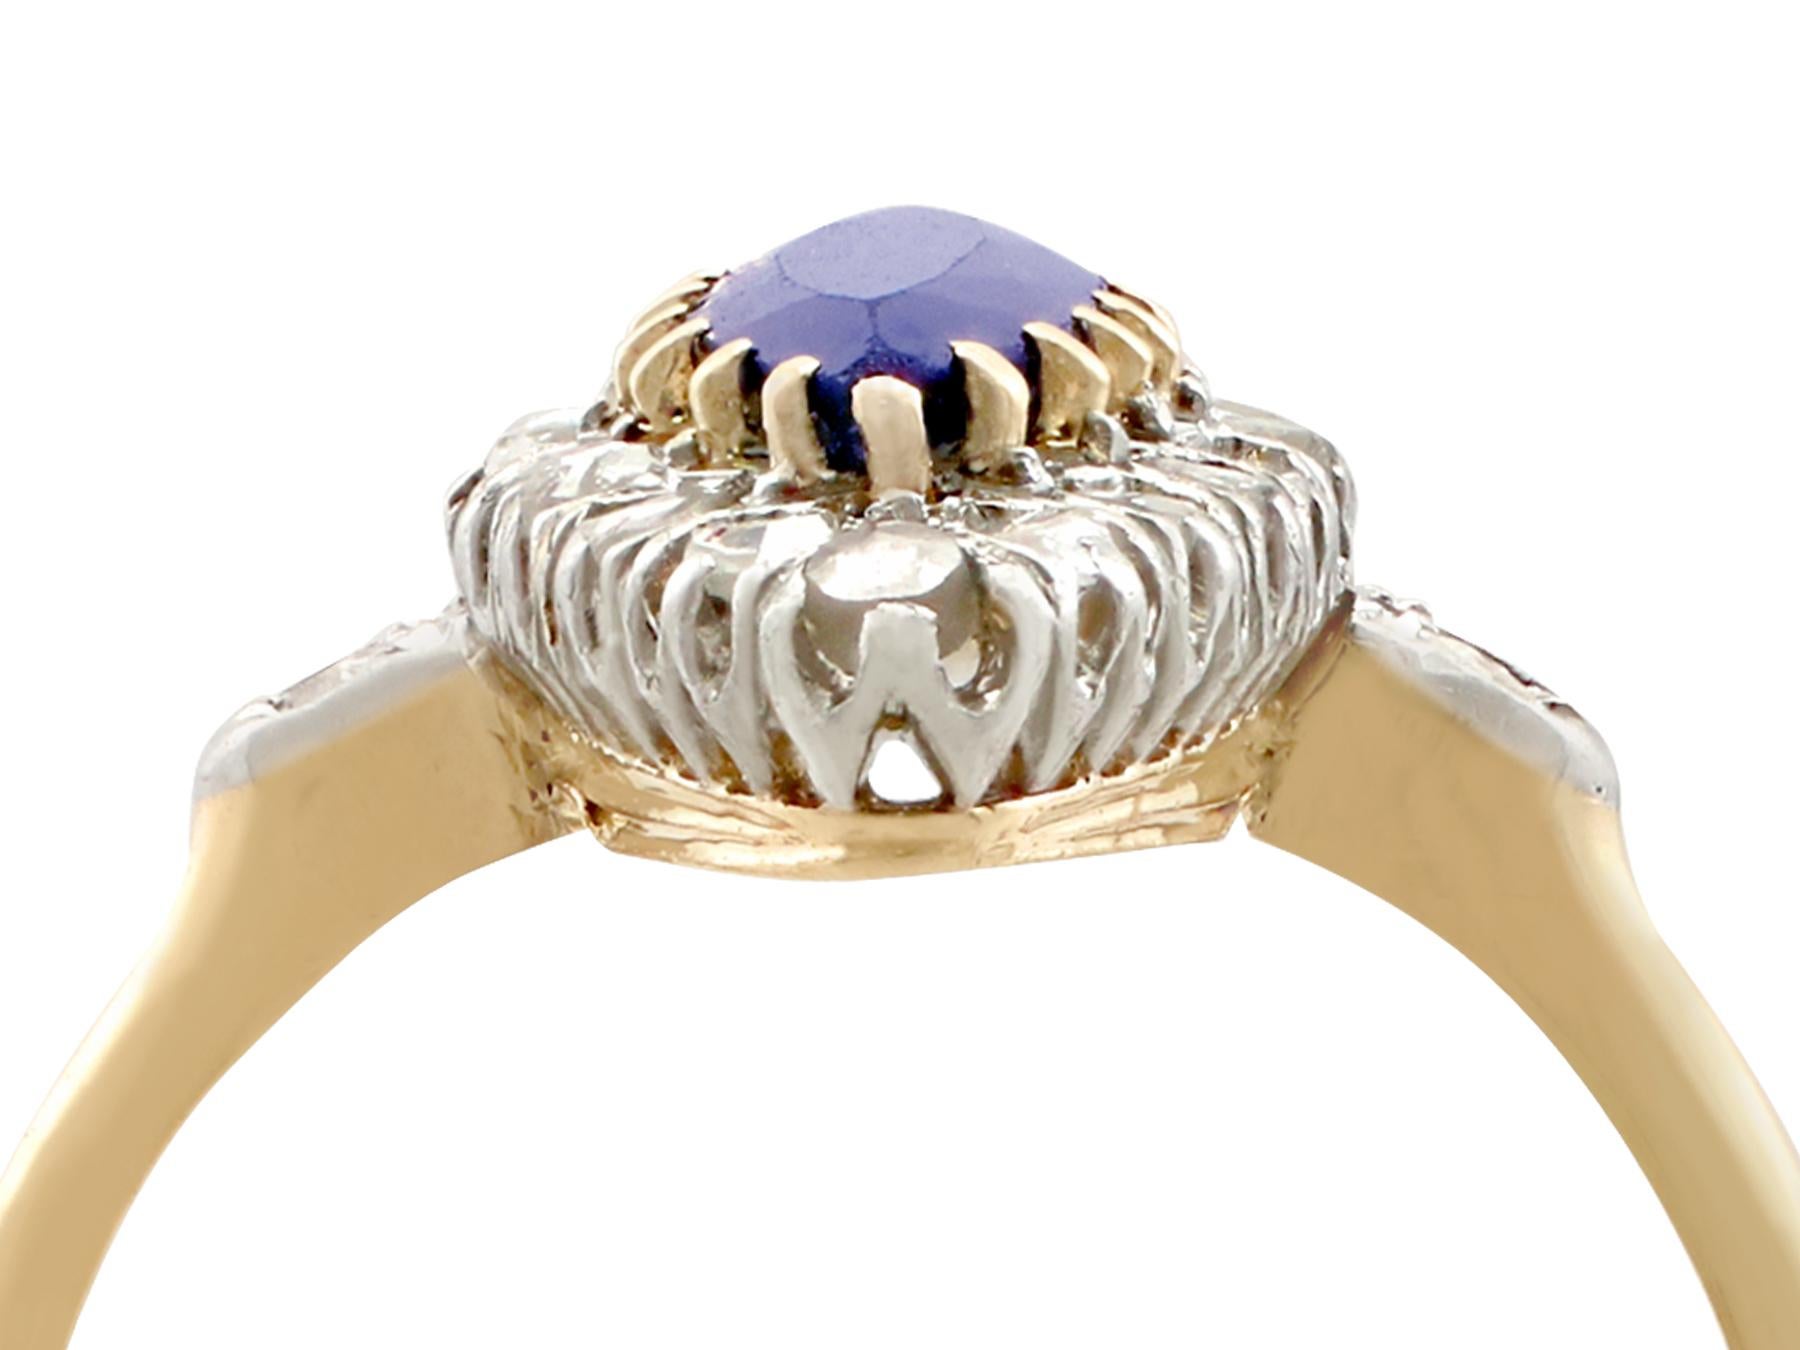 An impressive antique 1.90 Ct sapphire and 0.60 Ct diamond, 18k yellow gold and platinum set marquise ring; part of our diverse antique jewelry collections.

This fine and impressive sapphire ring has been crafted in 18k yellow gold with a platinum